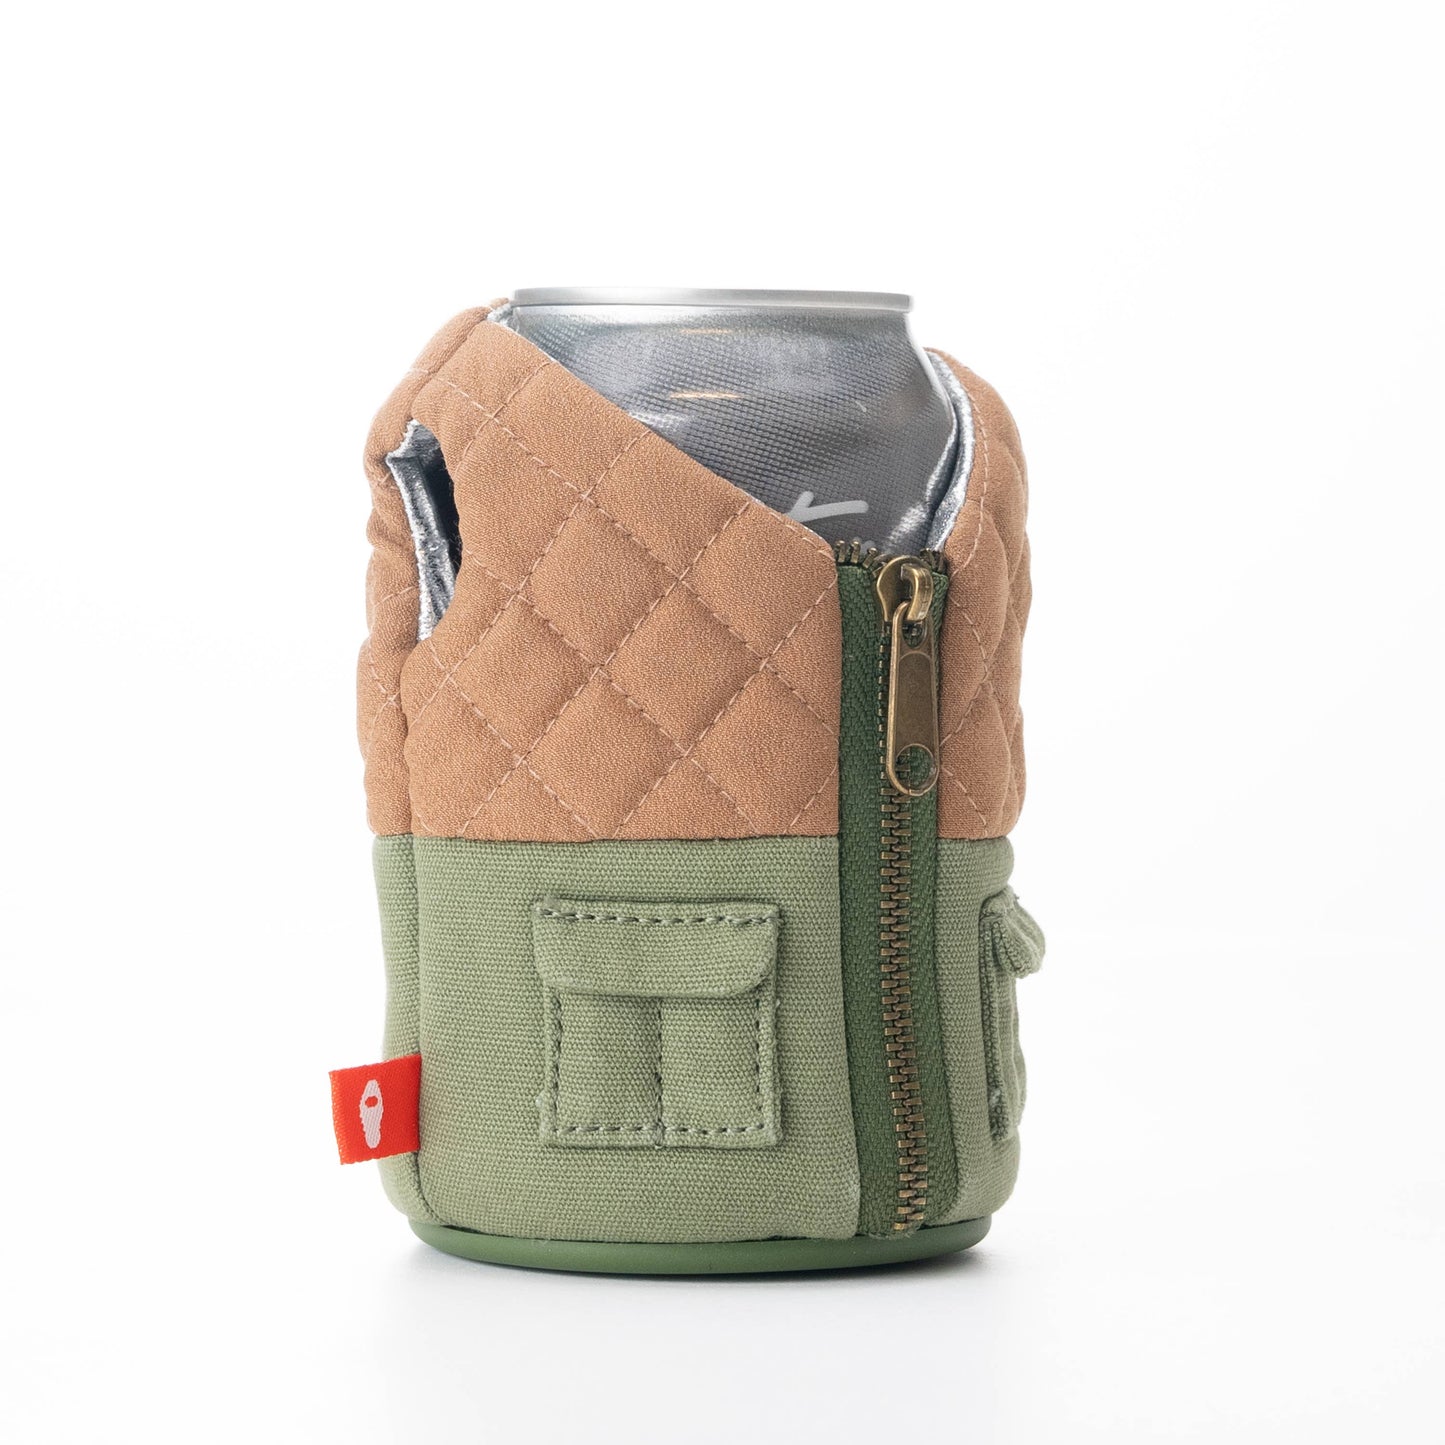 The Bird Dog - 12oz Can Cooler - Olive Green/Dry Grass